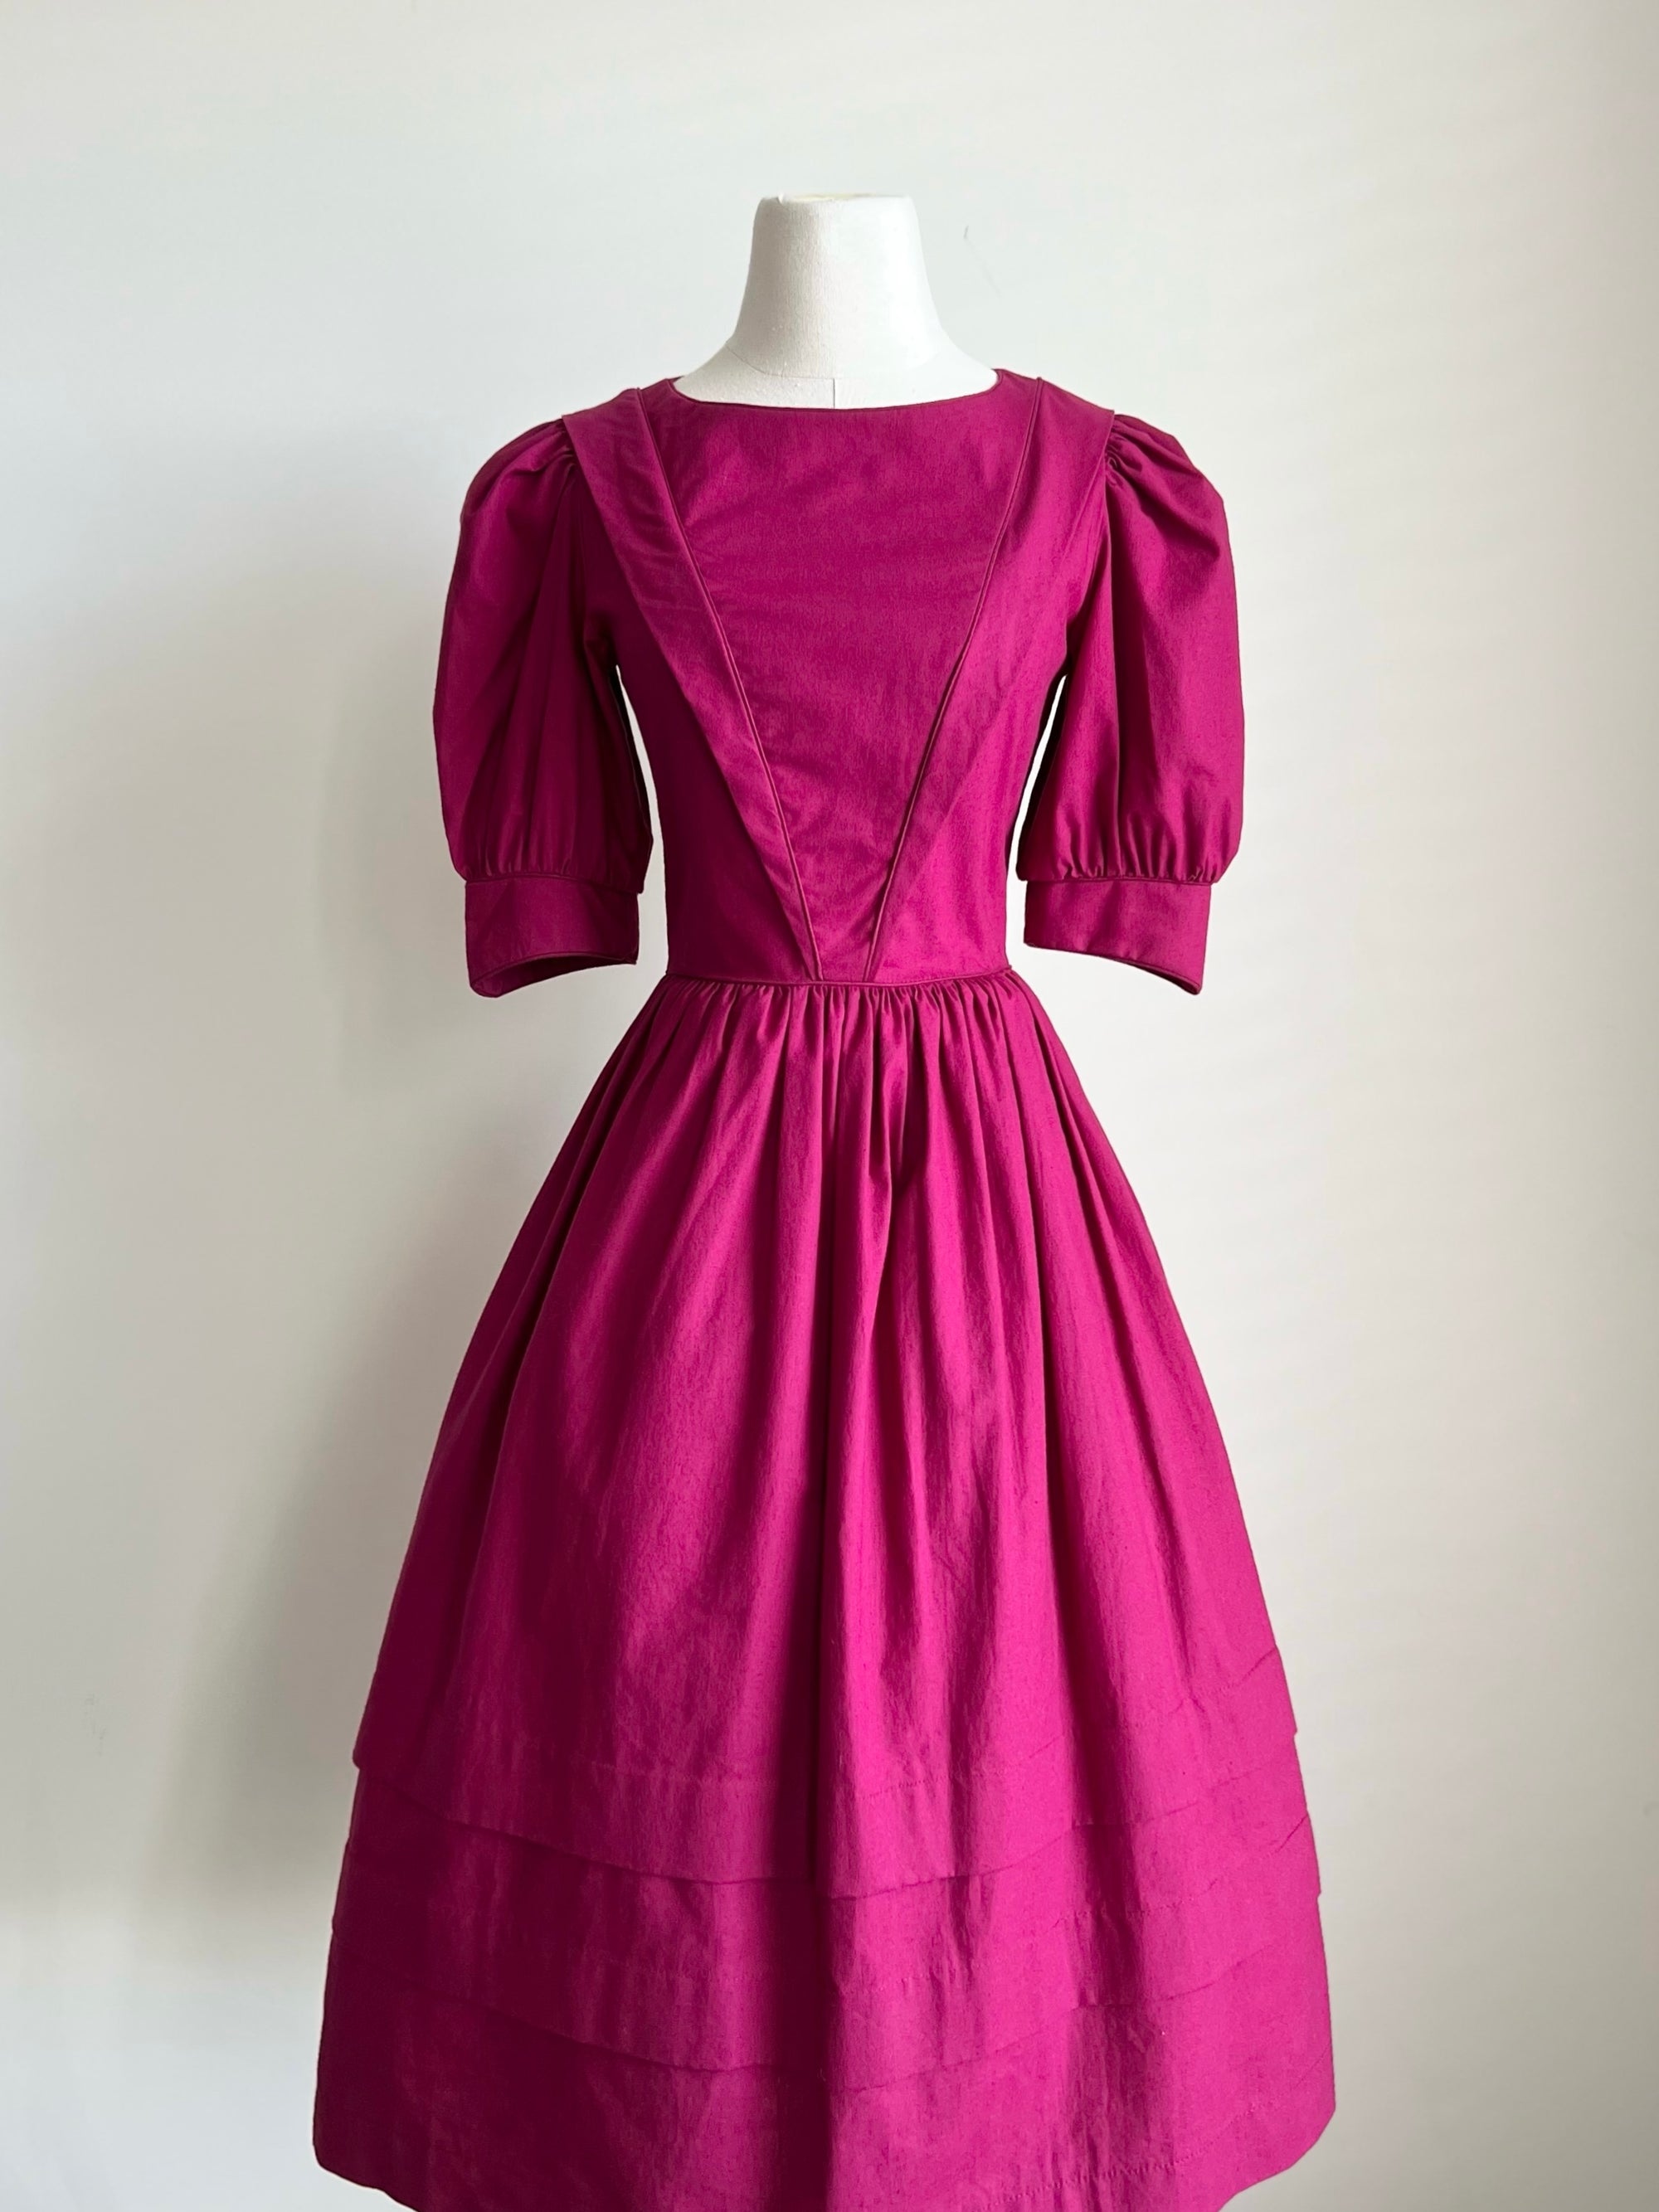 1980s Laura Ashley Midi Cottagecore Raspberry Red Dress with Puff Sleeves XS